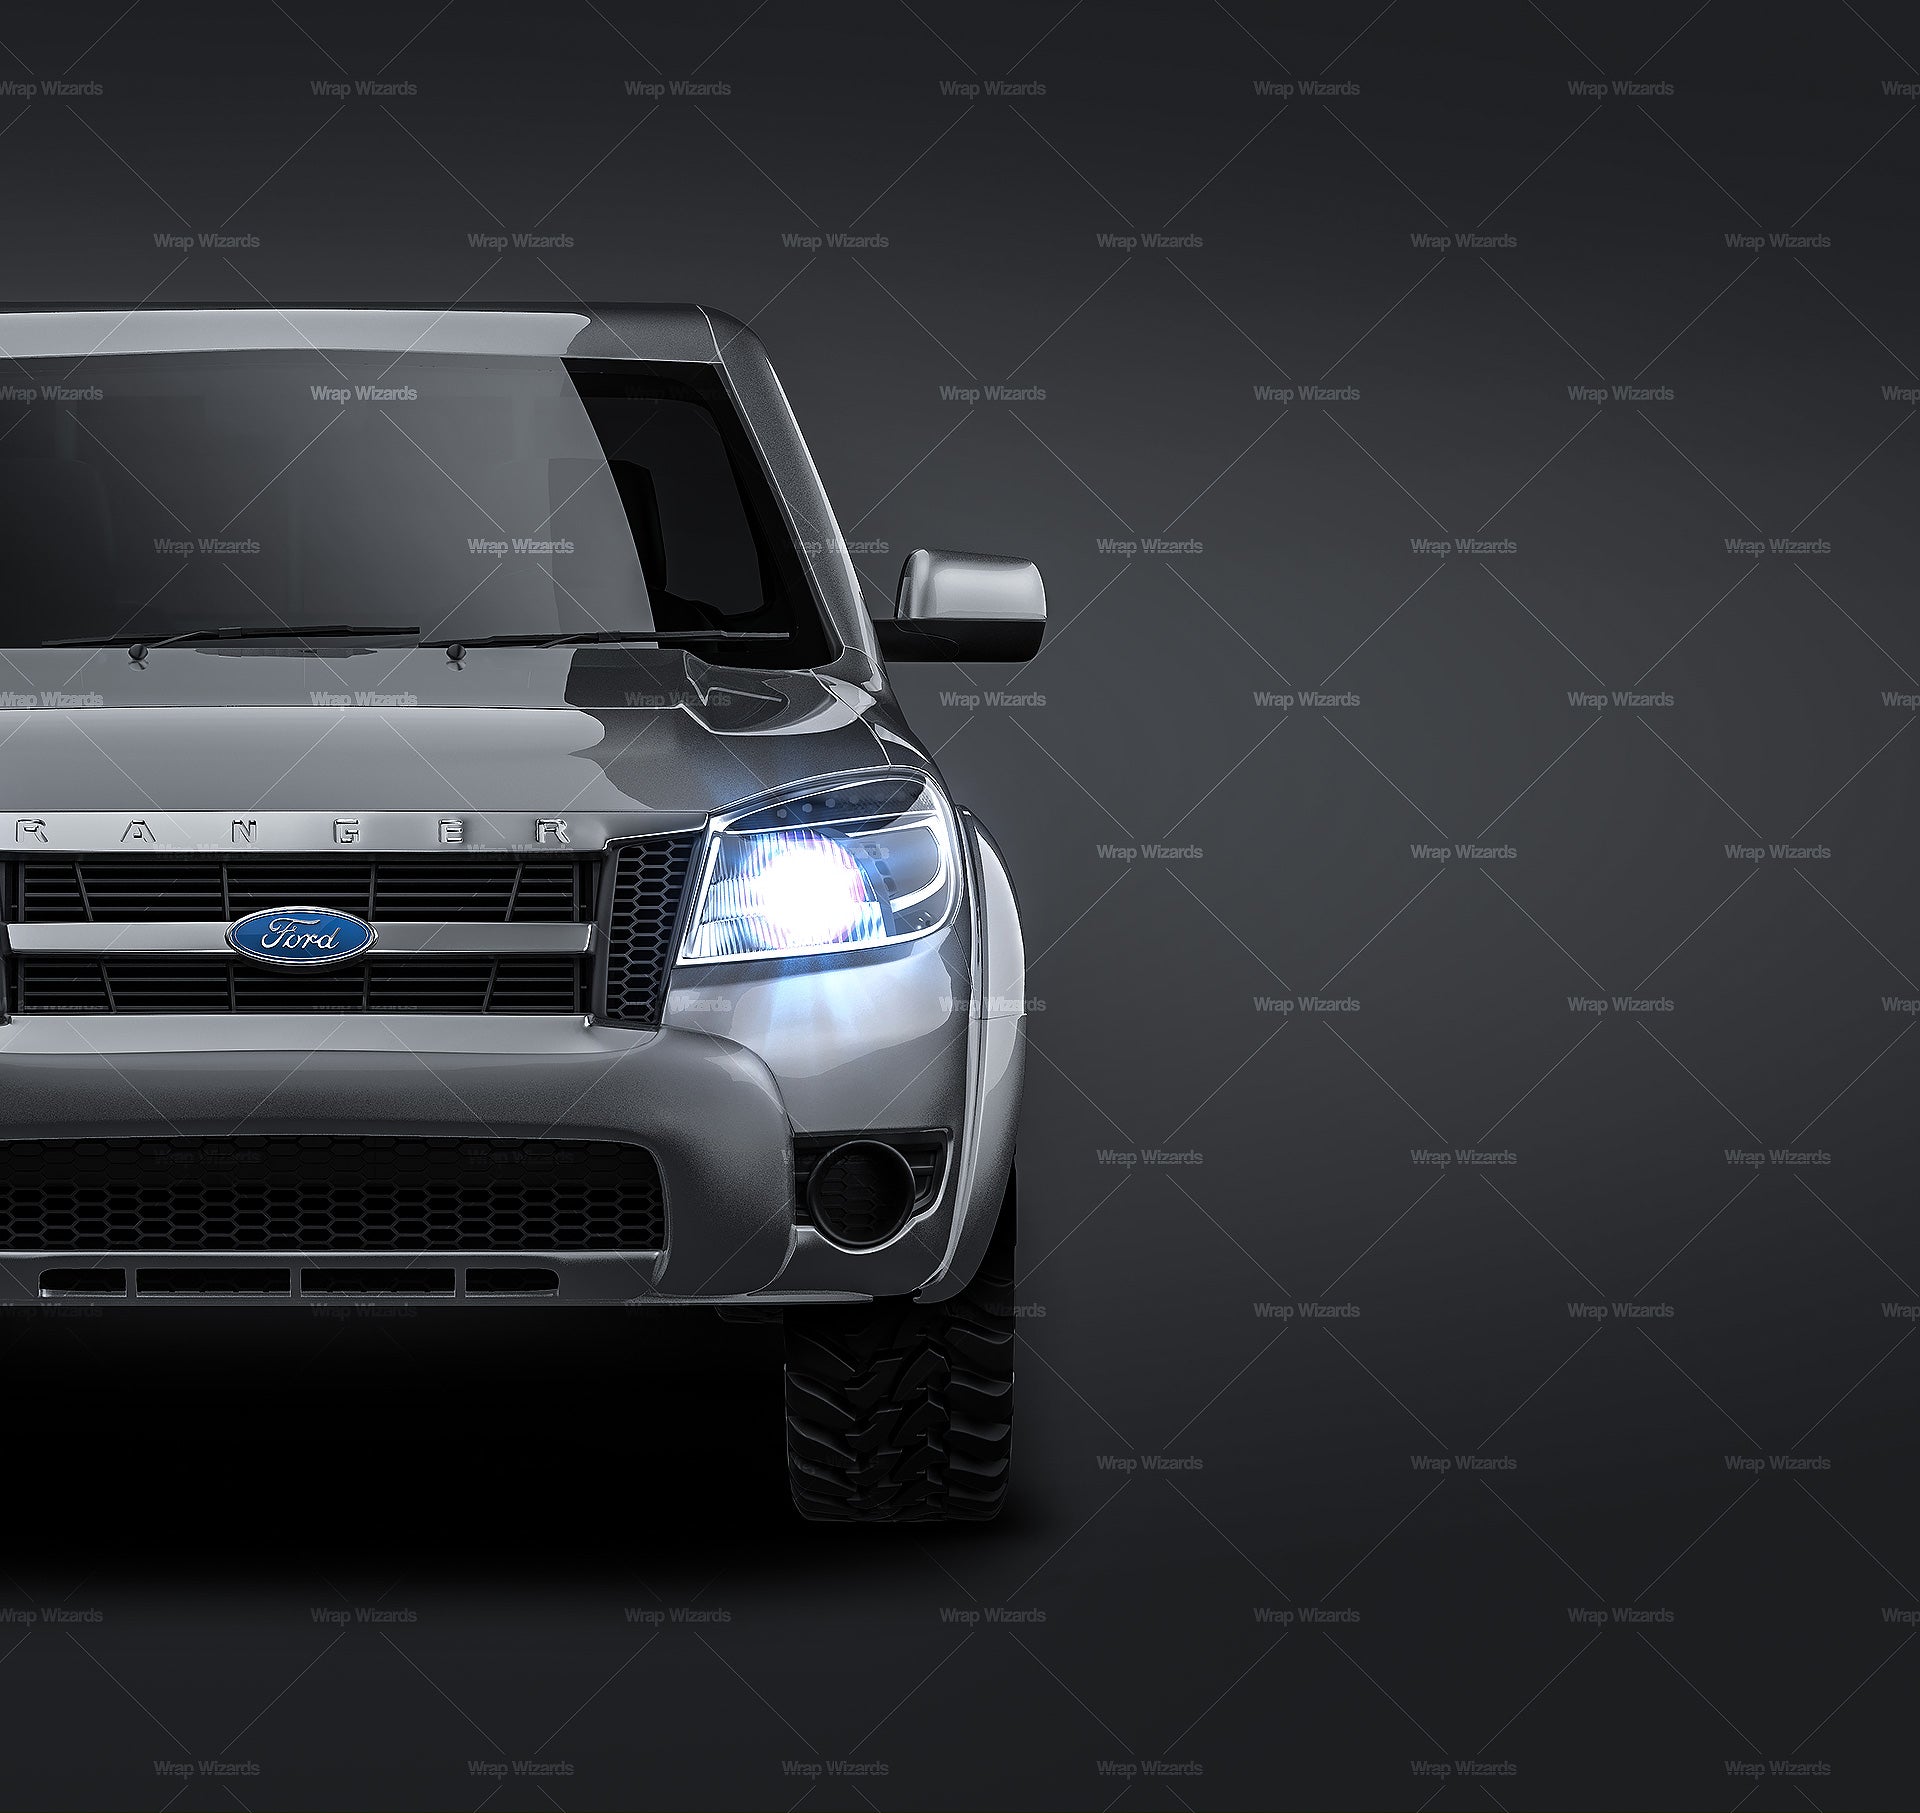 Ford Ranger double cab glossy finish - all sides Car Mockup Template.psd